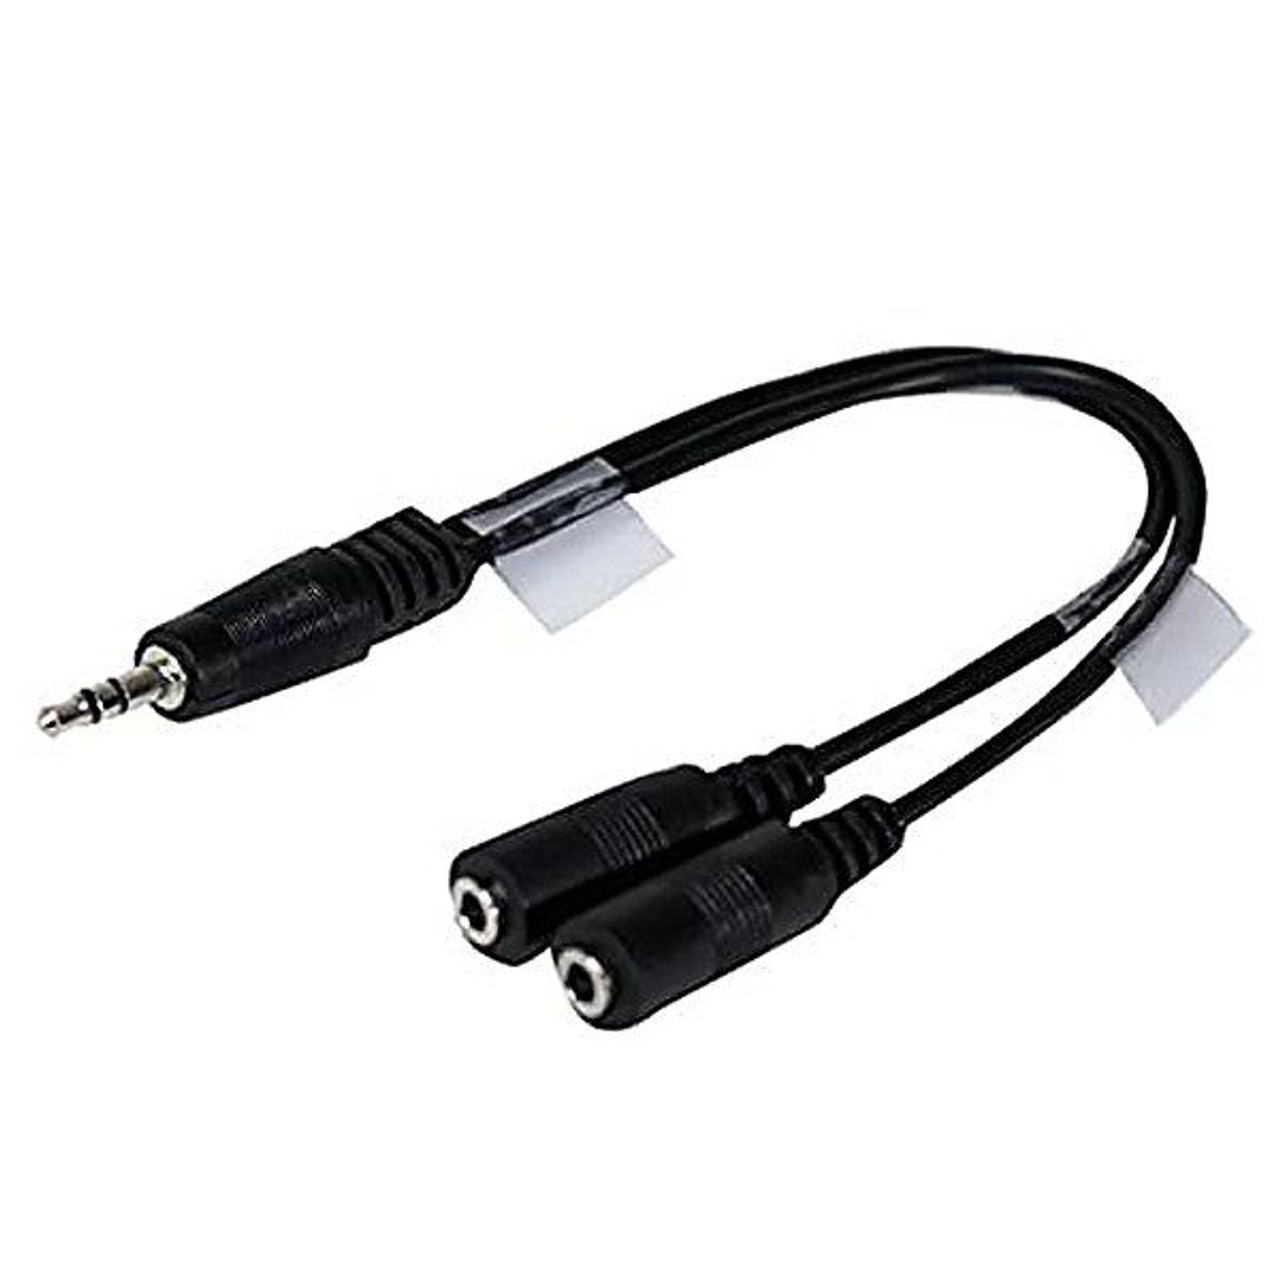 Eagle 6 Inch 3.5 mm Stereo Male to Dual 3.5mm Female Cable Stero Y Adapter 6" Inch Pure Oxygen Free Copper Fully Molded Jacket Interconnect Cable